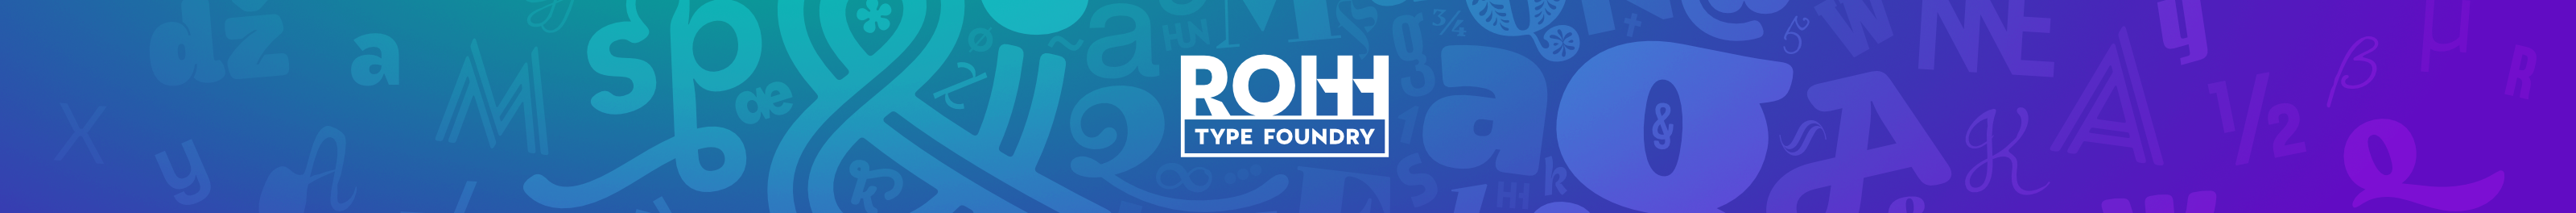 ROHH Type Foundry's profile banner